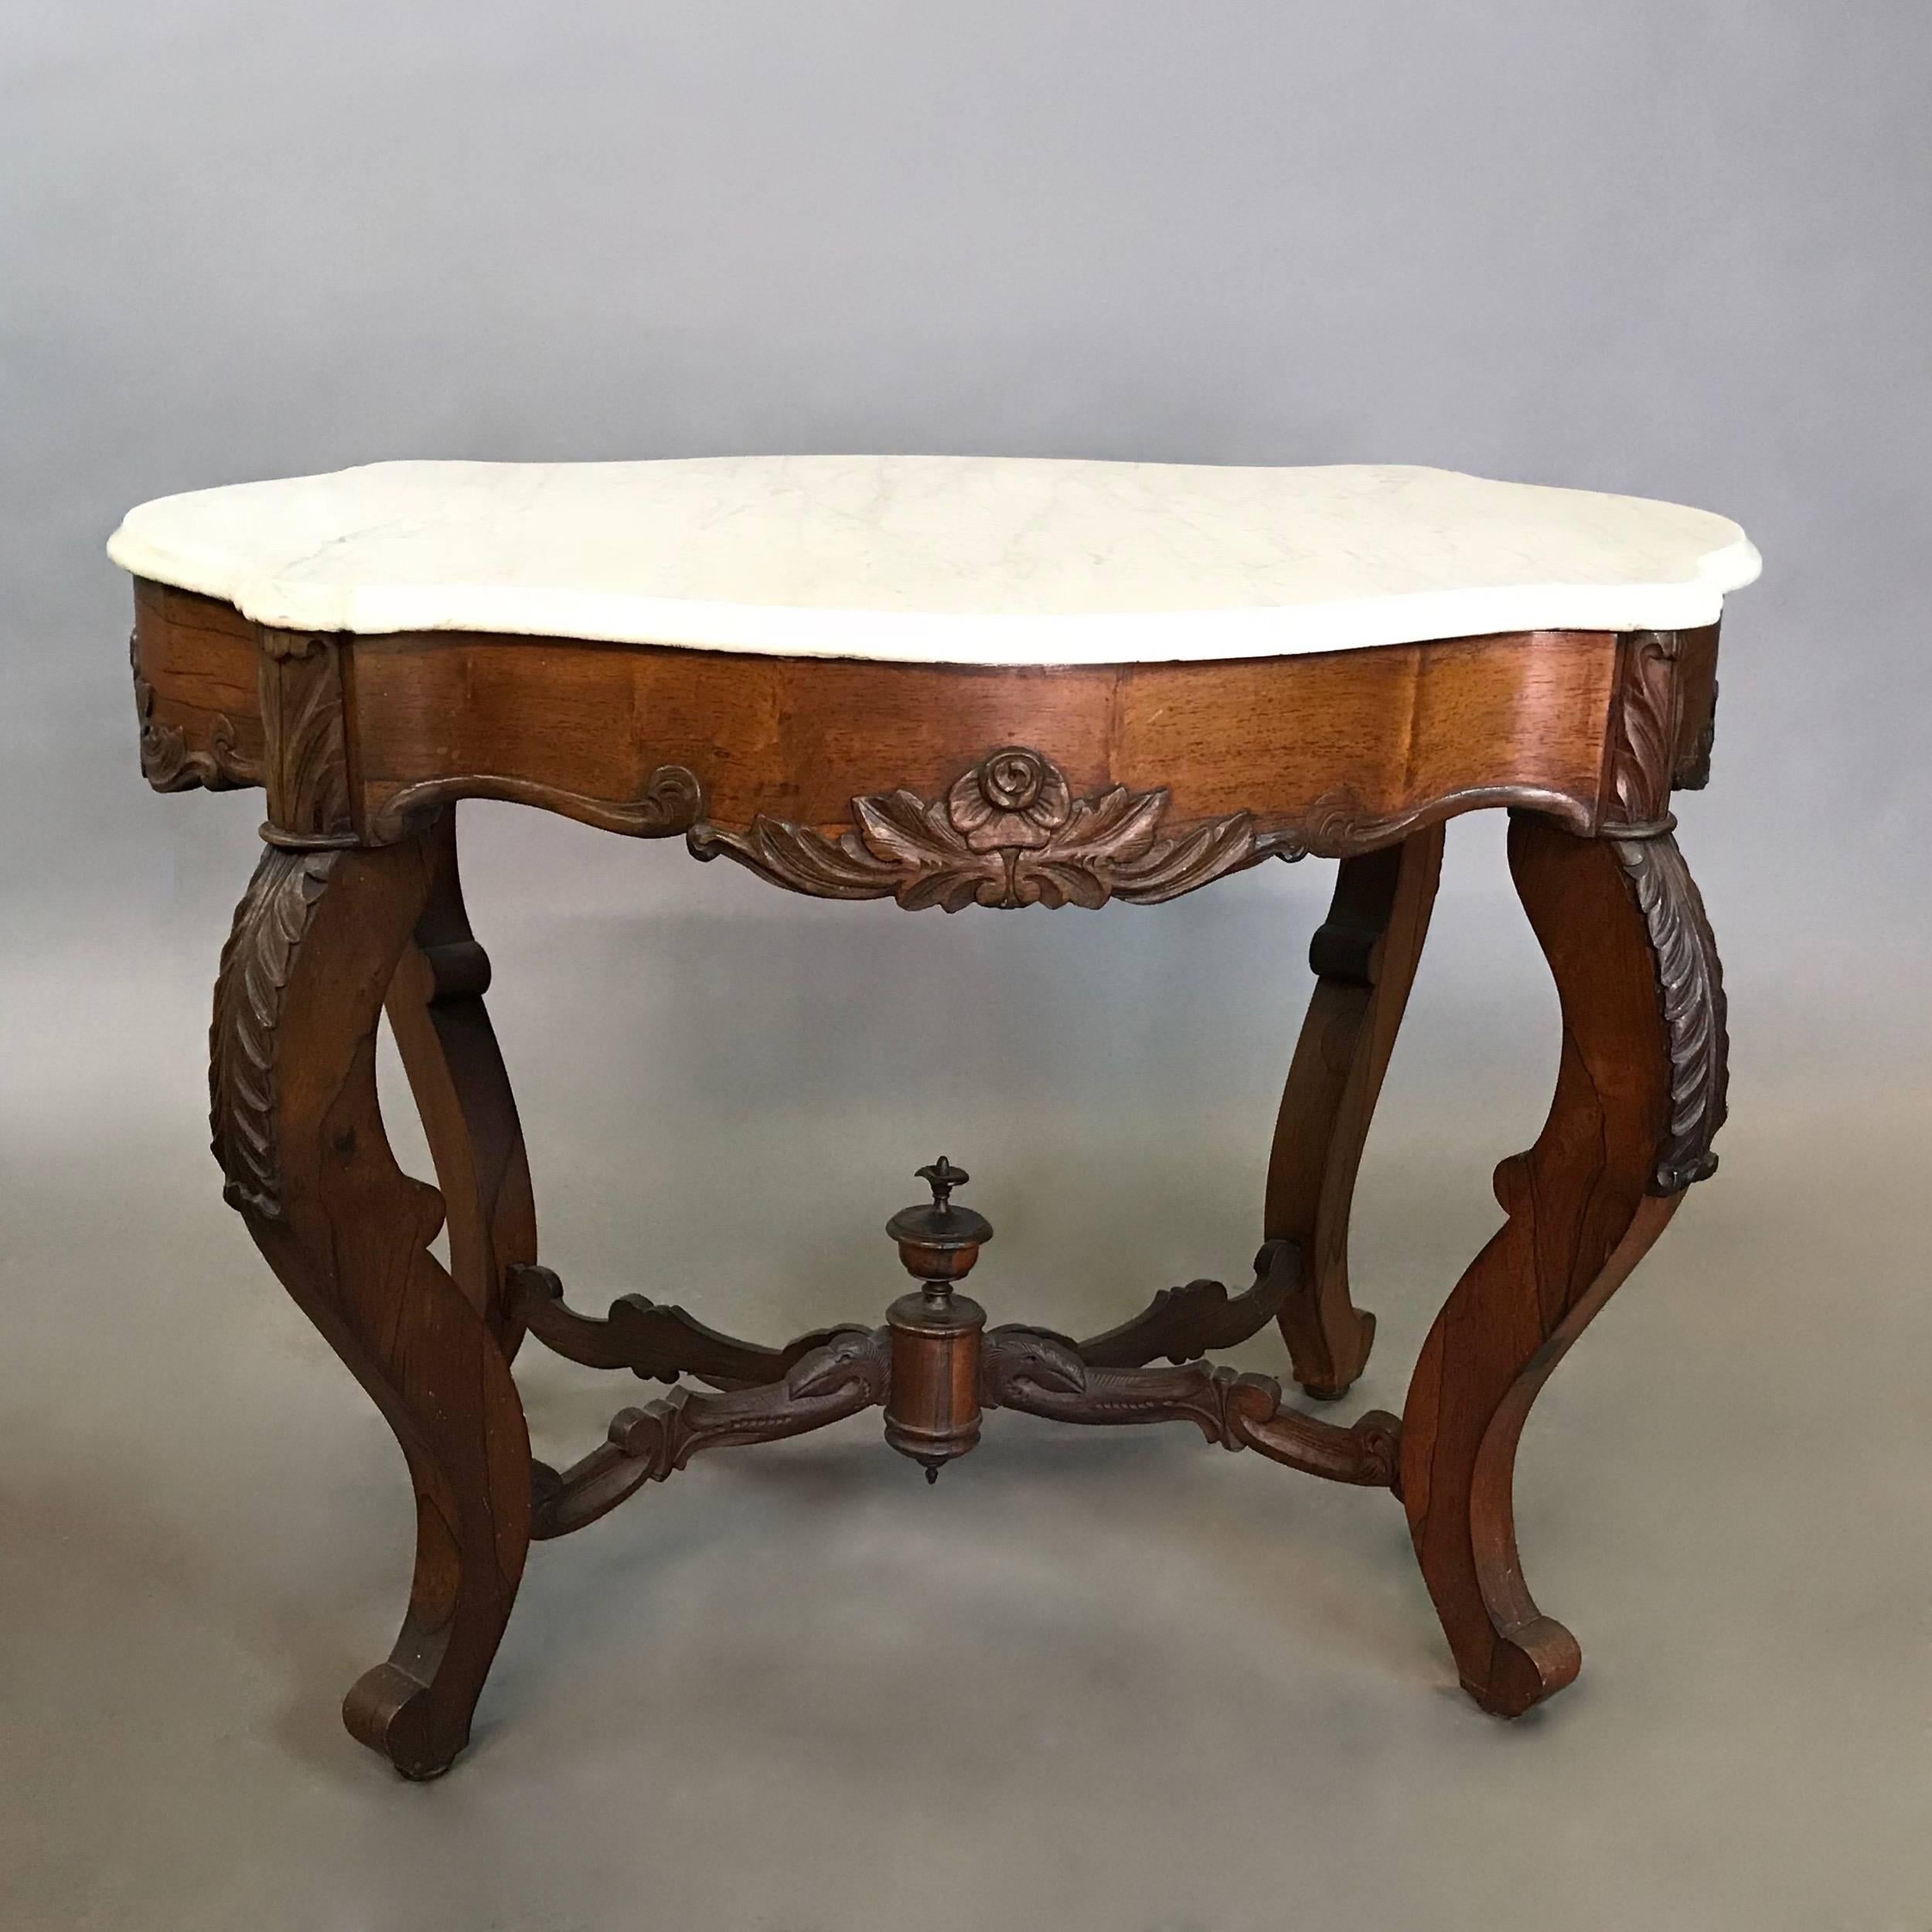 Antique, 19th century, center table features a beautifully carved, rosewood base with cabriole legs, acanthus knees and beveled edge marble top. 